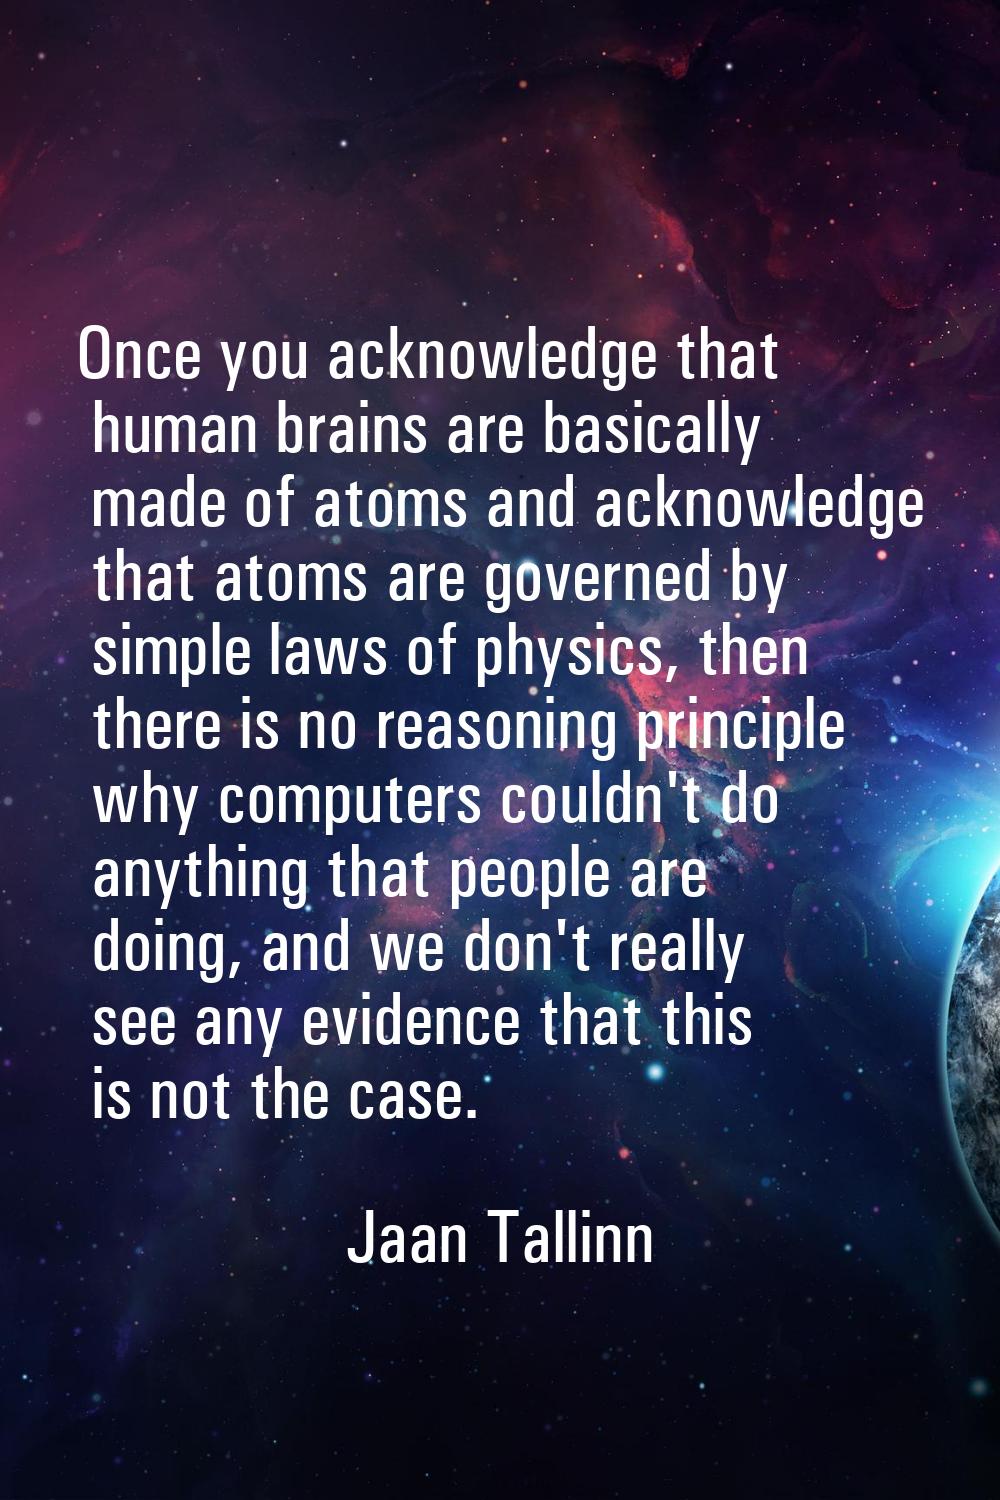 Once you acknowledge that human brains are basically made of atoms and acknowledge that atoms are g